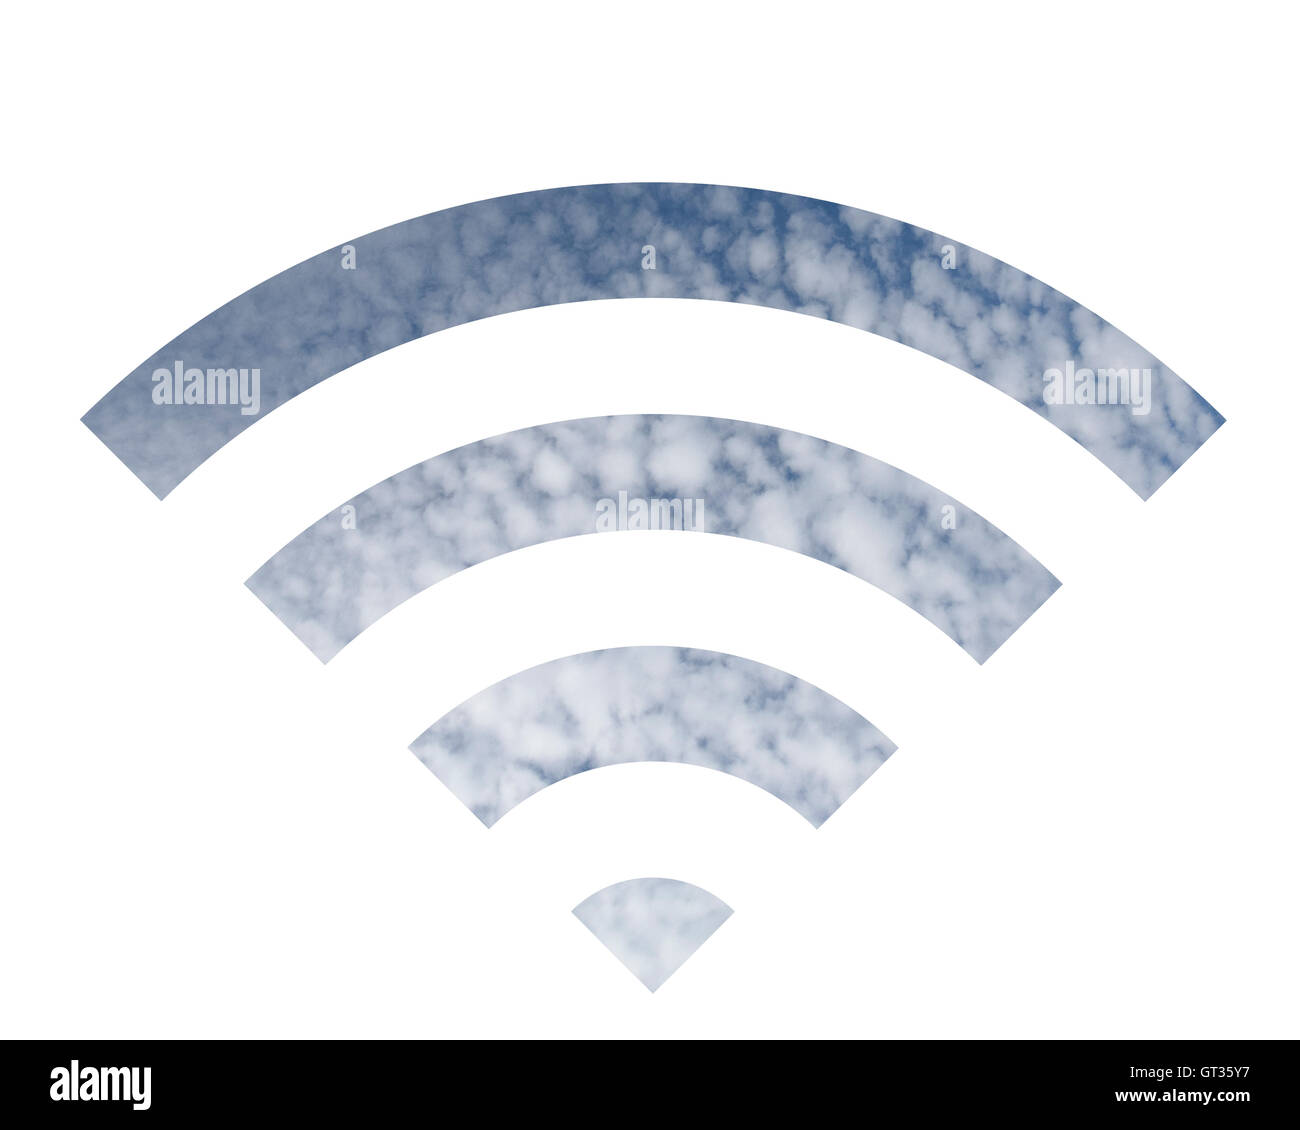 Wifi logo made out of cloud Stock Photo